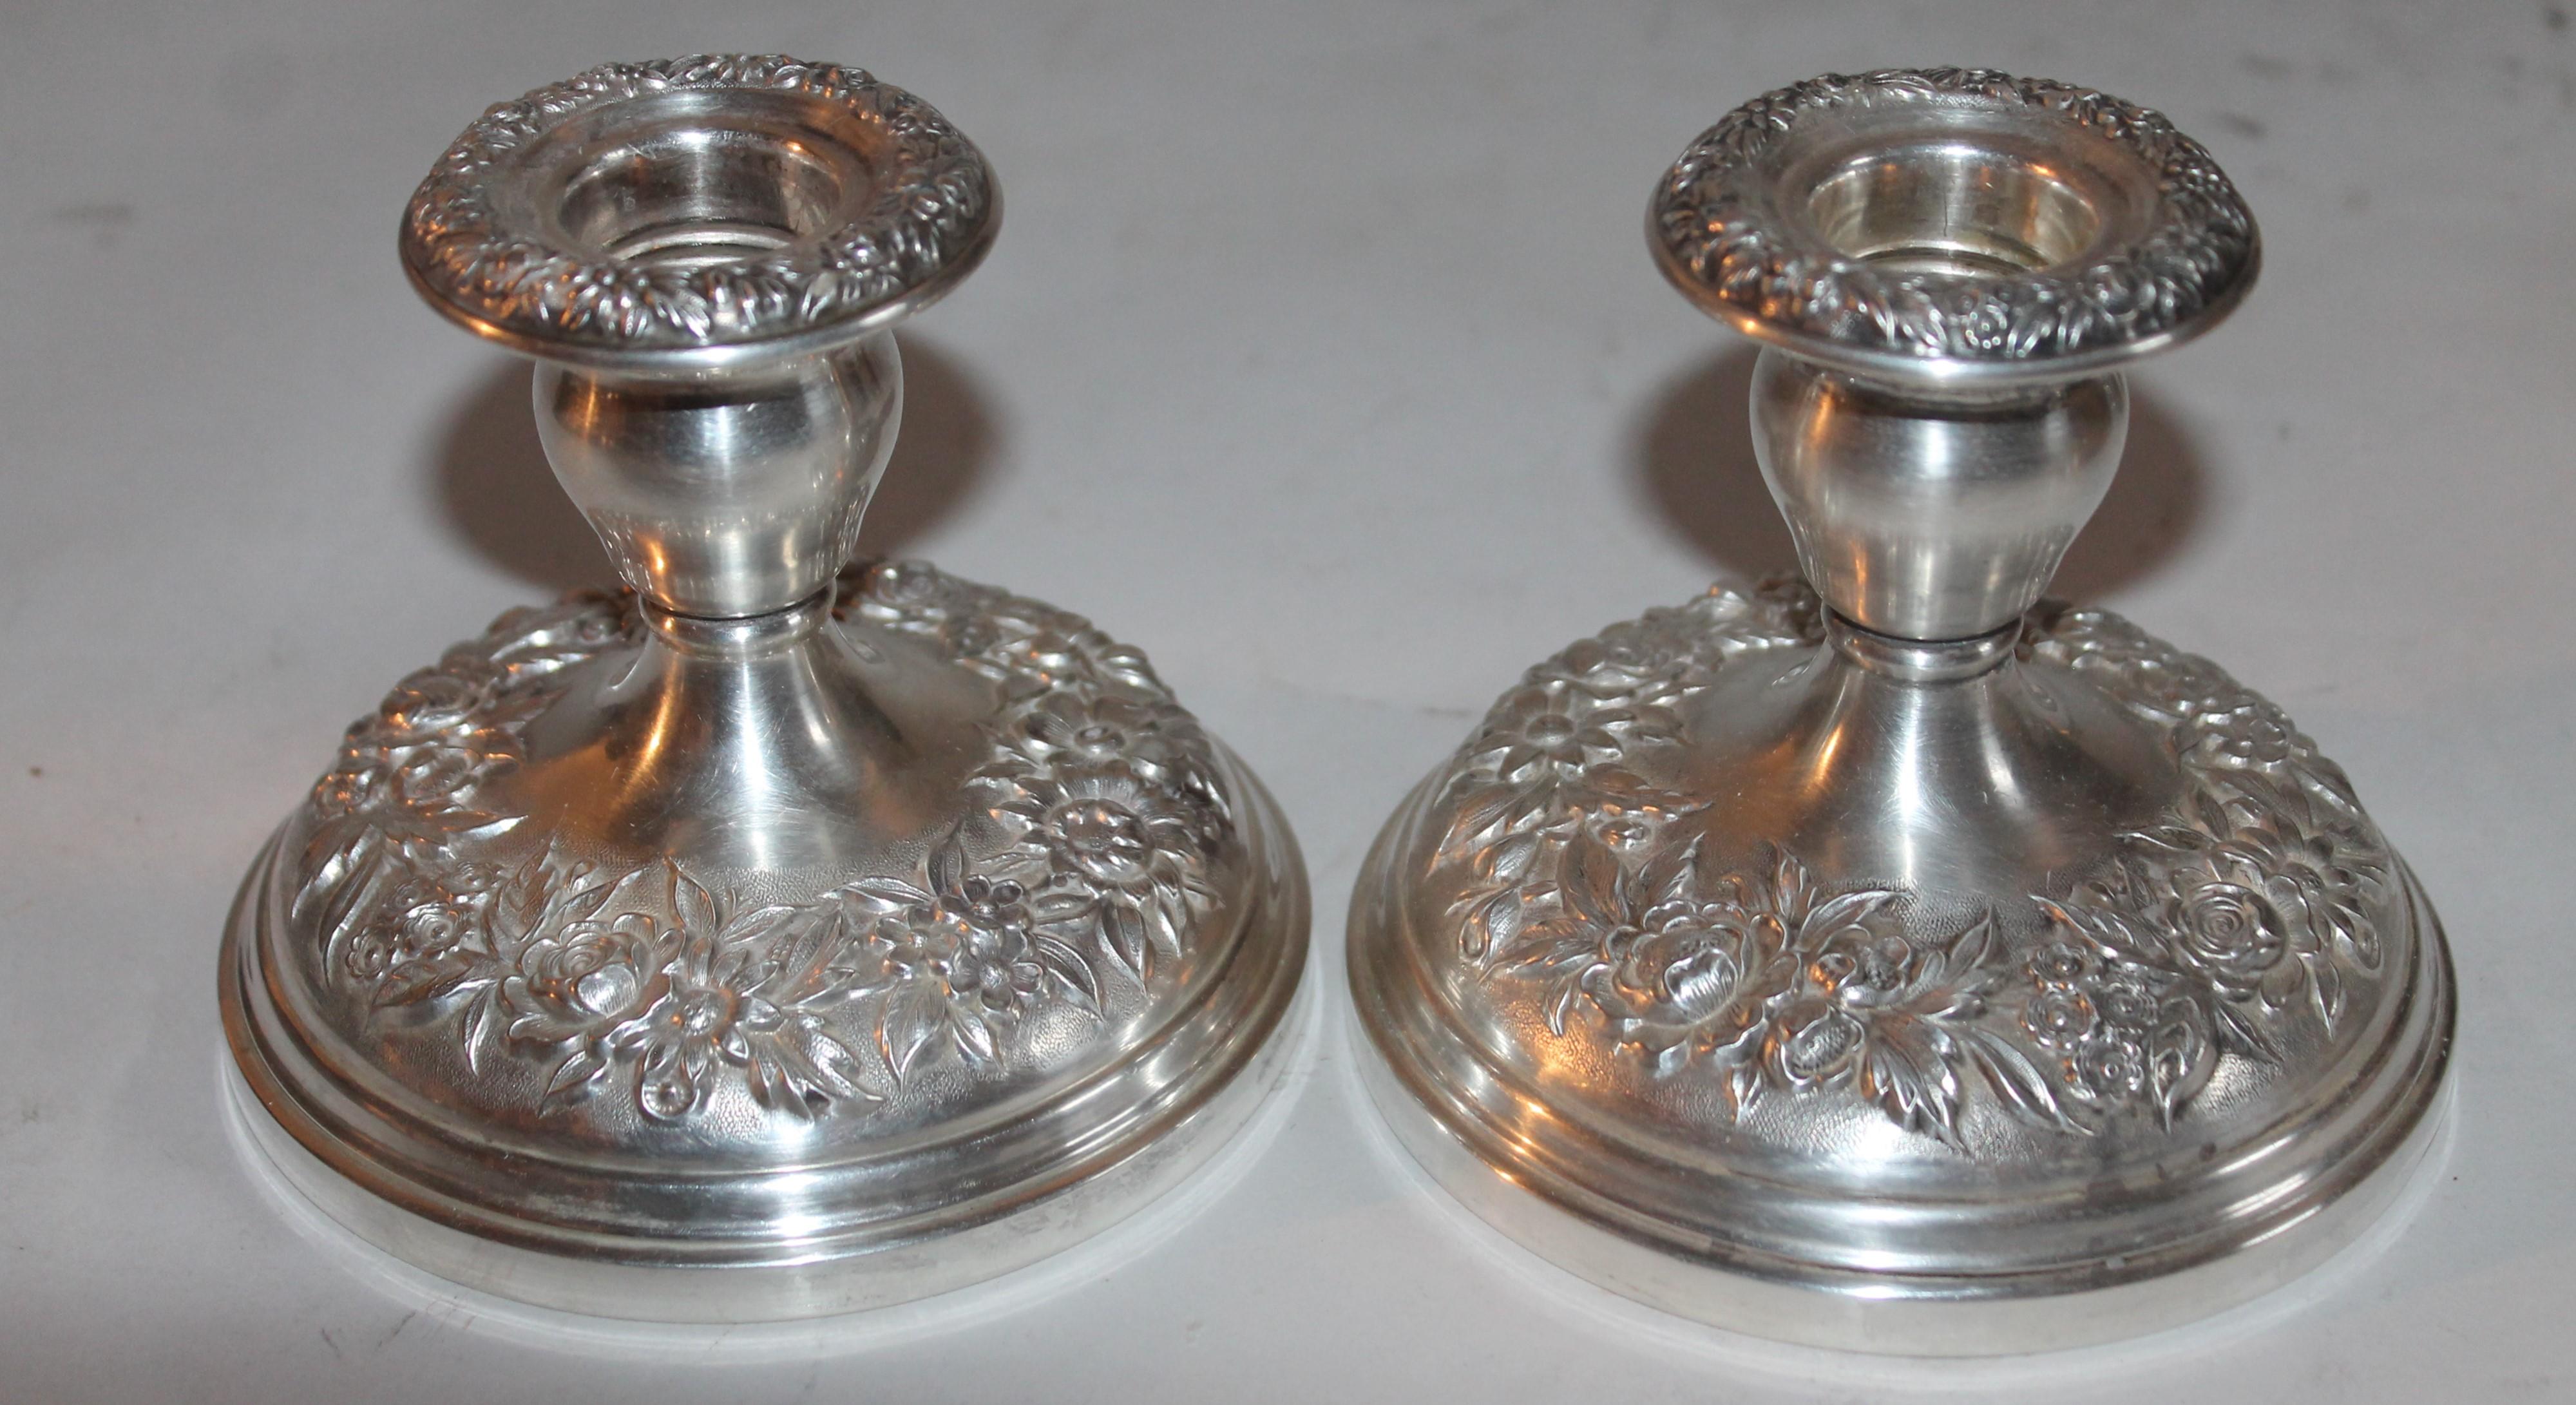 4.75 x 3.75 candle sticks/ These heavy sterling silver S.Kirk & Sons weighted candle holders are in pristine condition.